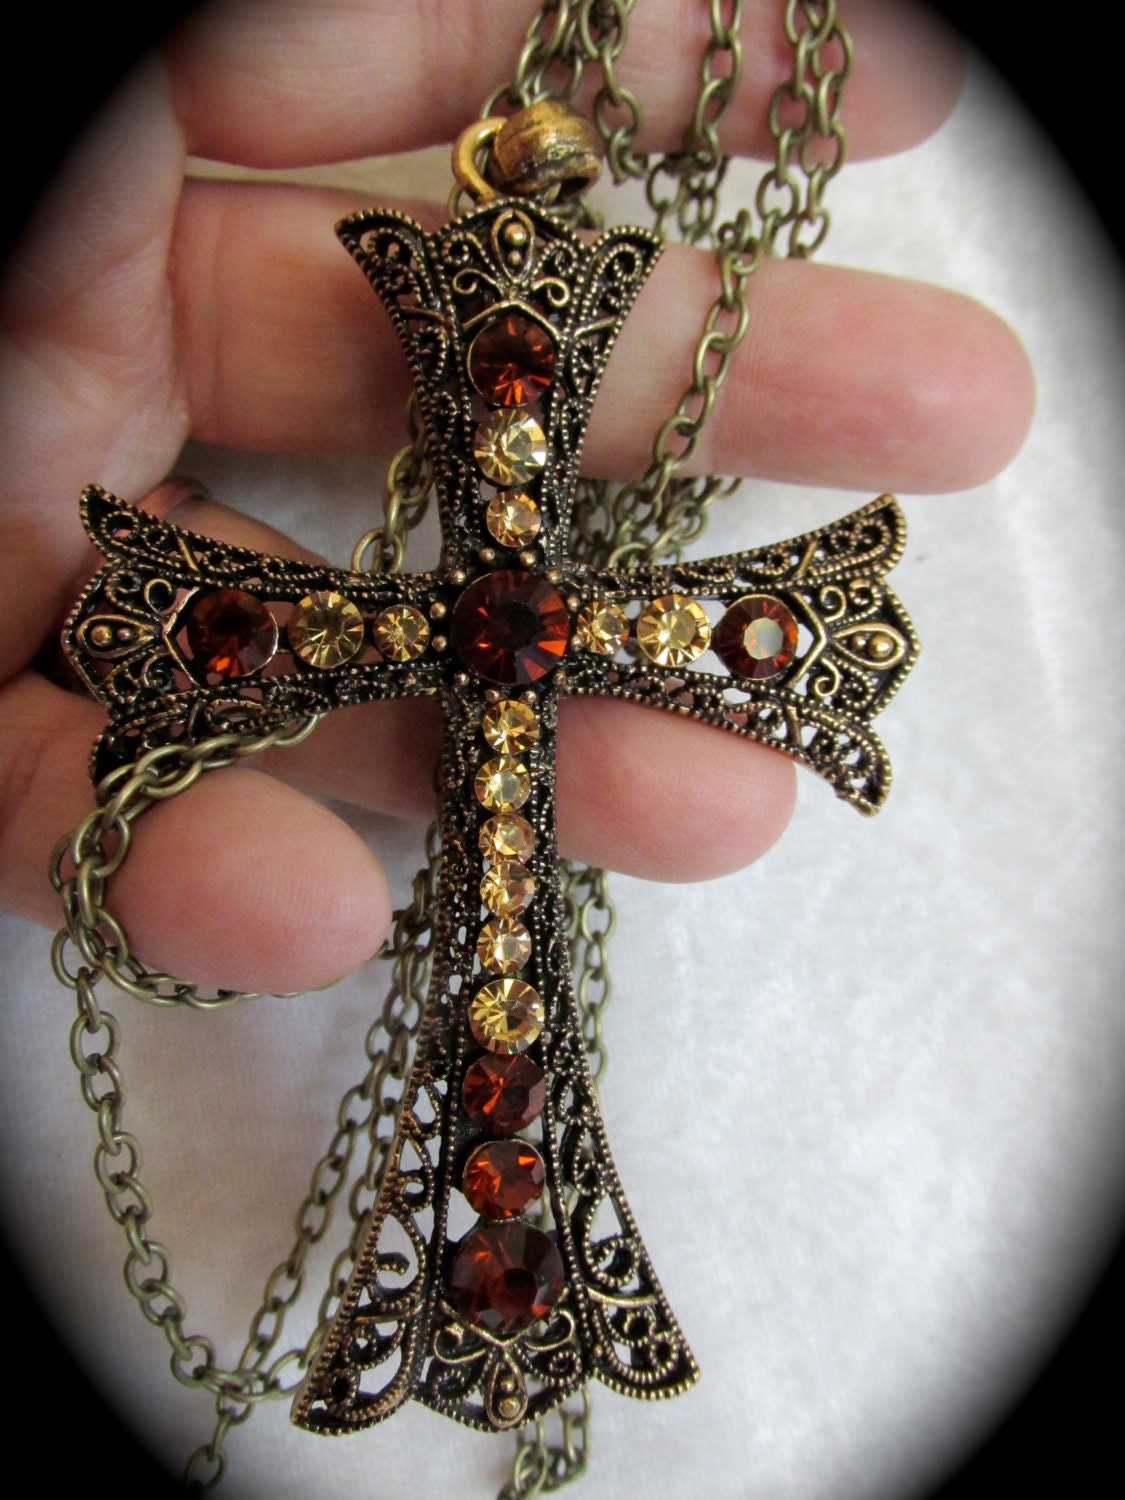 Large Reign Colonial Goth style Cross w/ Australian Crystals